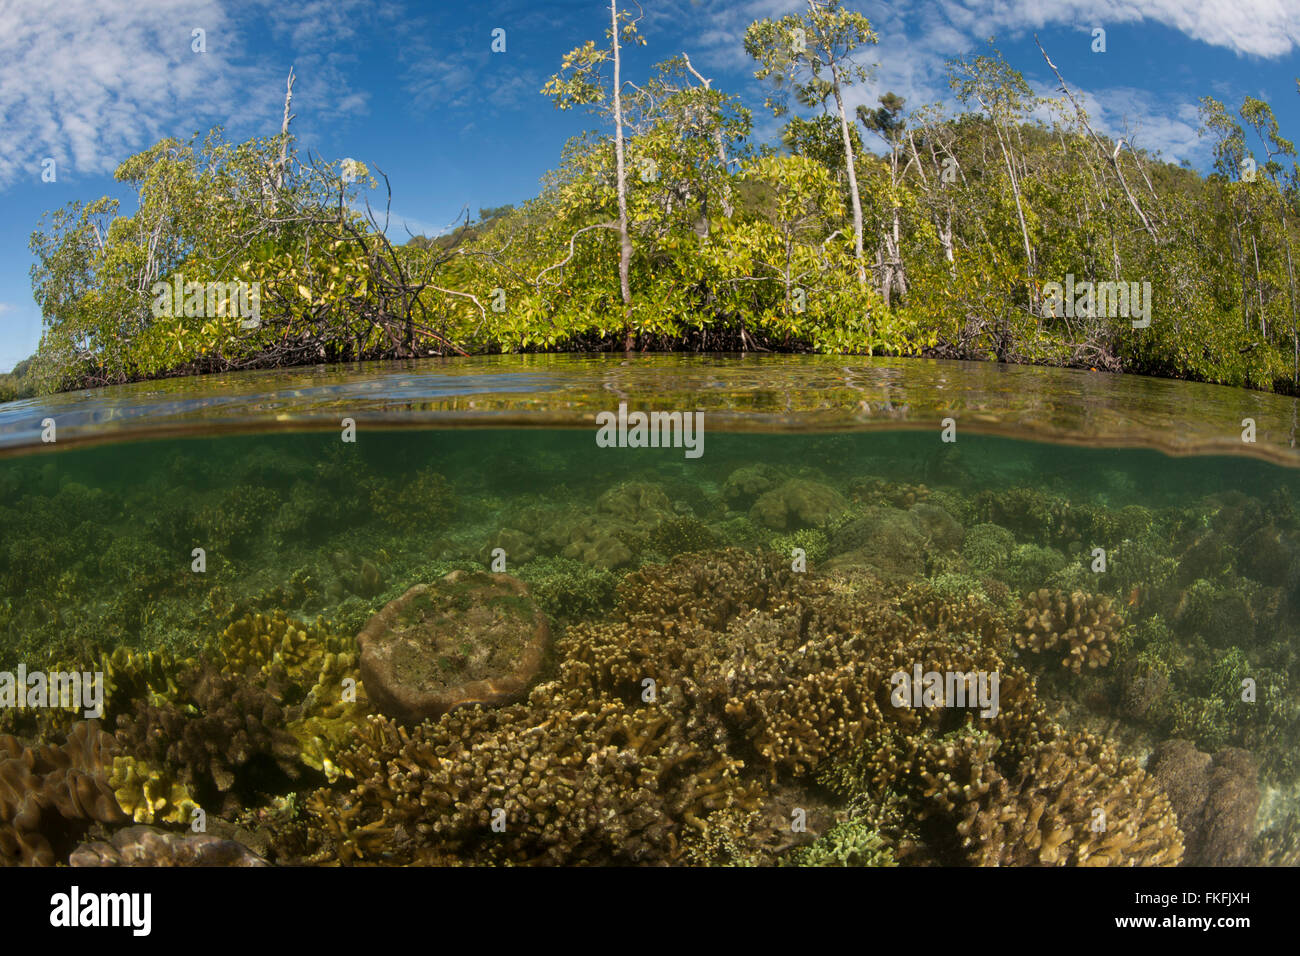 Split level of a shallow coral reef and mangroves. North Raja Ampat, West Papua, Indonesia Stock Photo